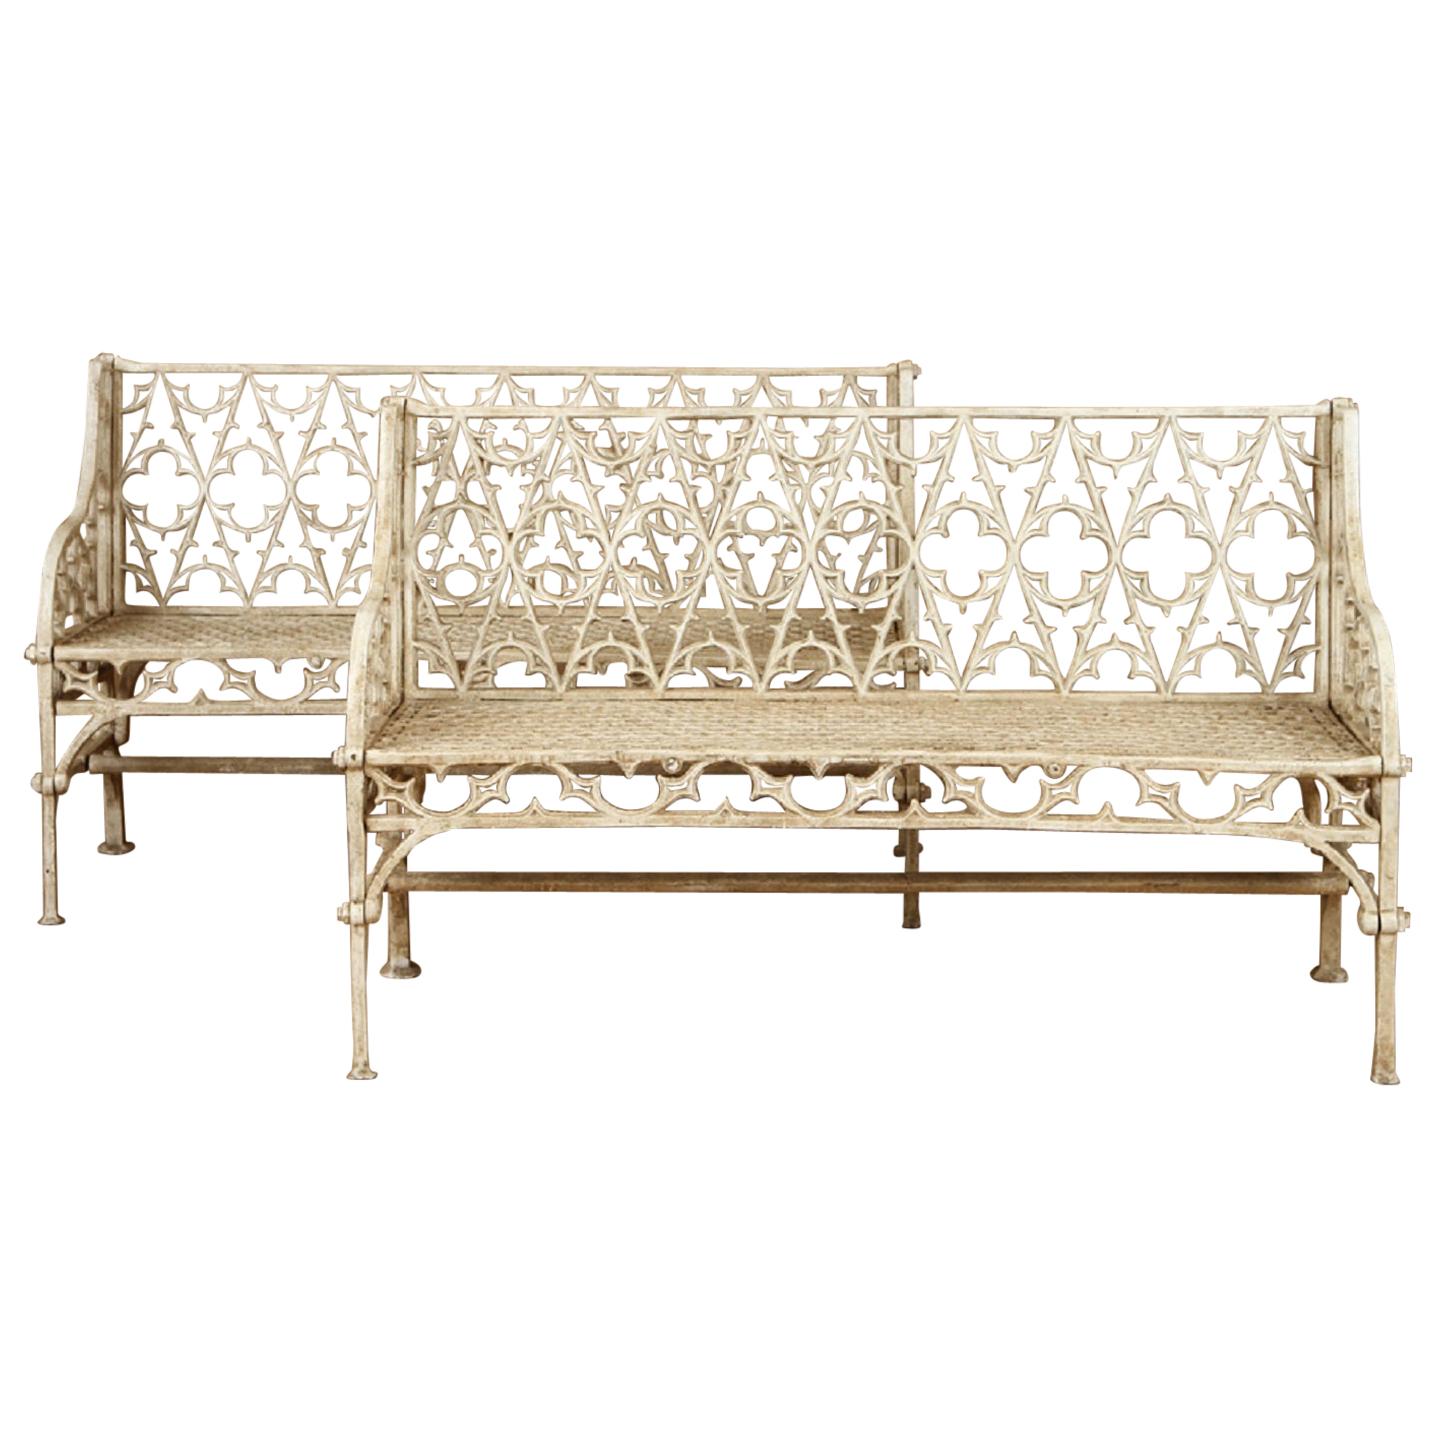 Pair of Cast Iron Garden Benches in the Manner of Coalbrookdale, 20th Century